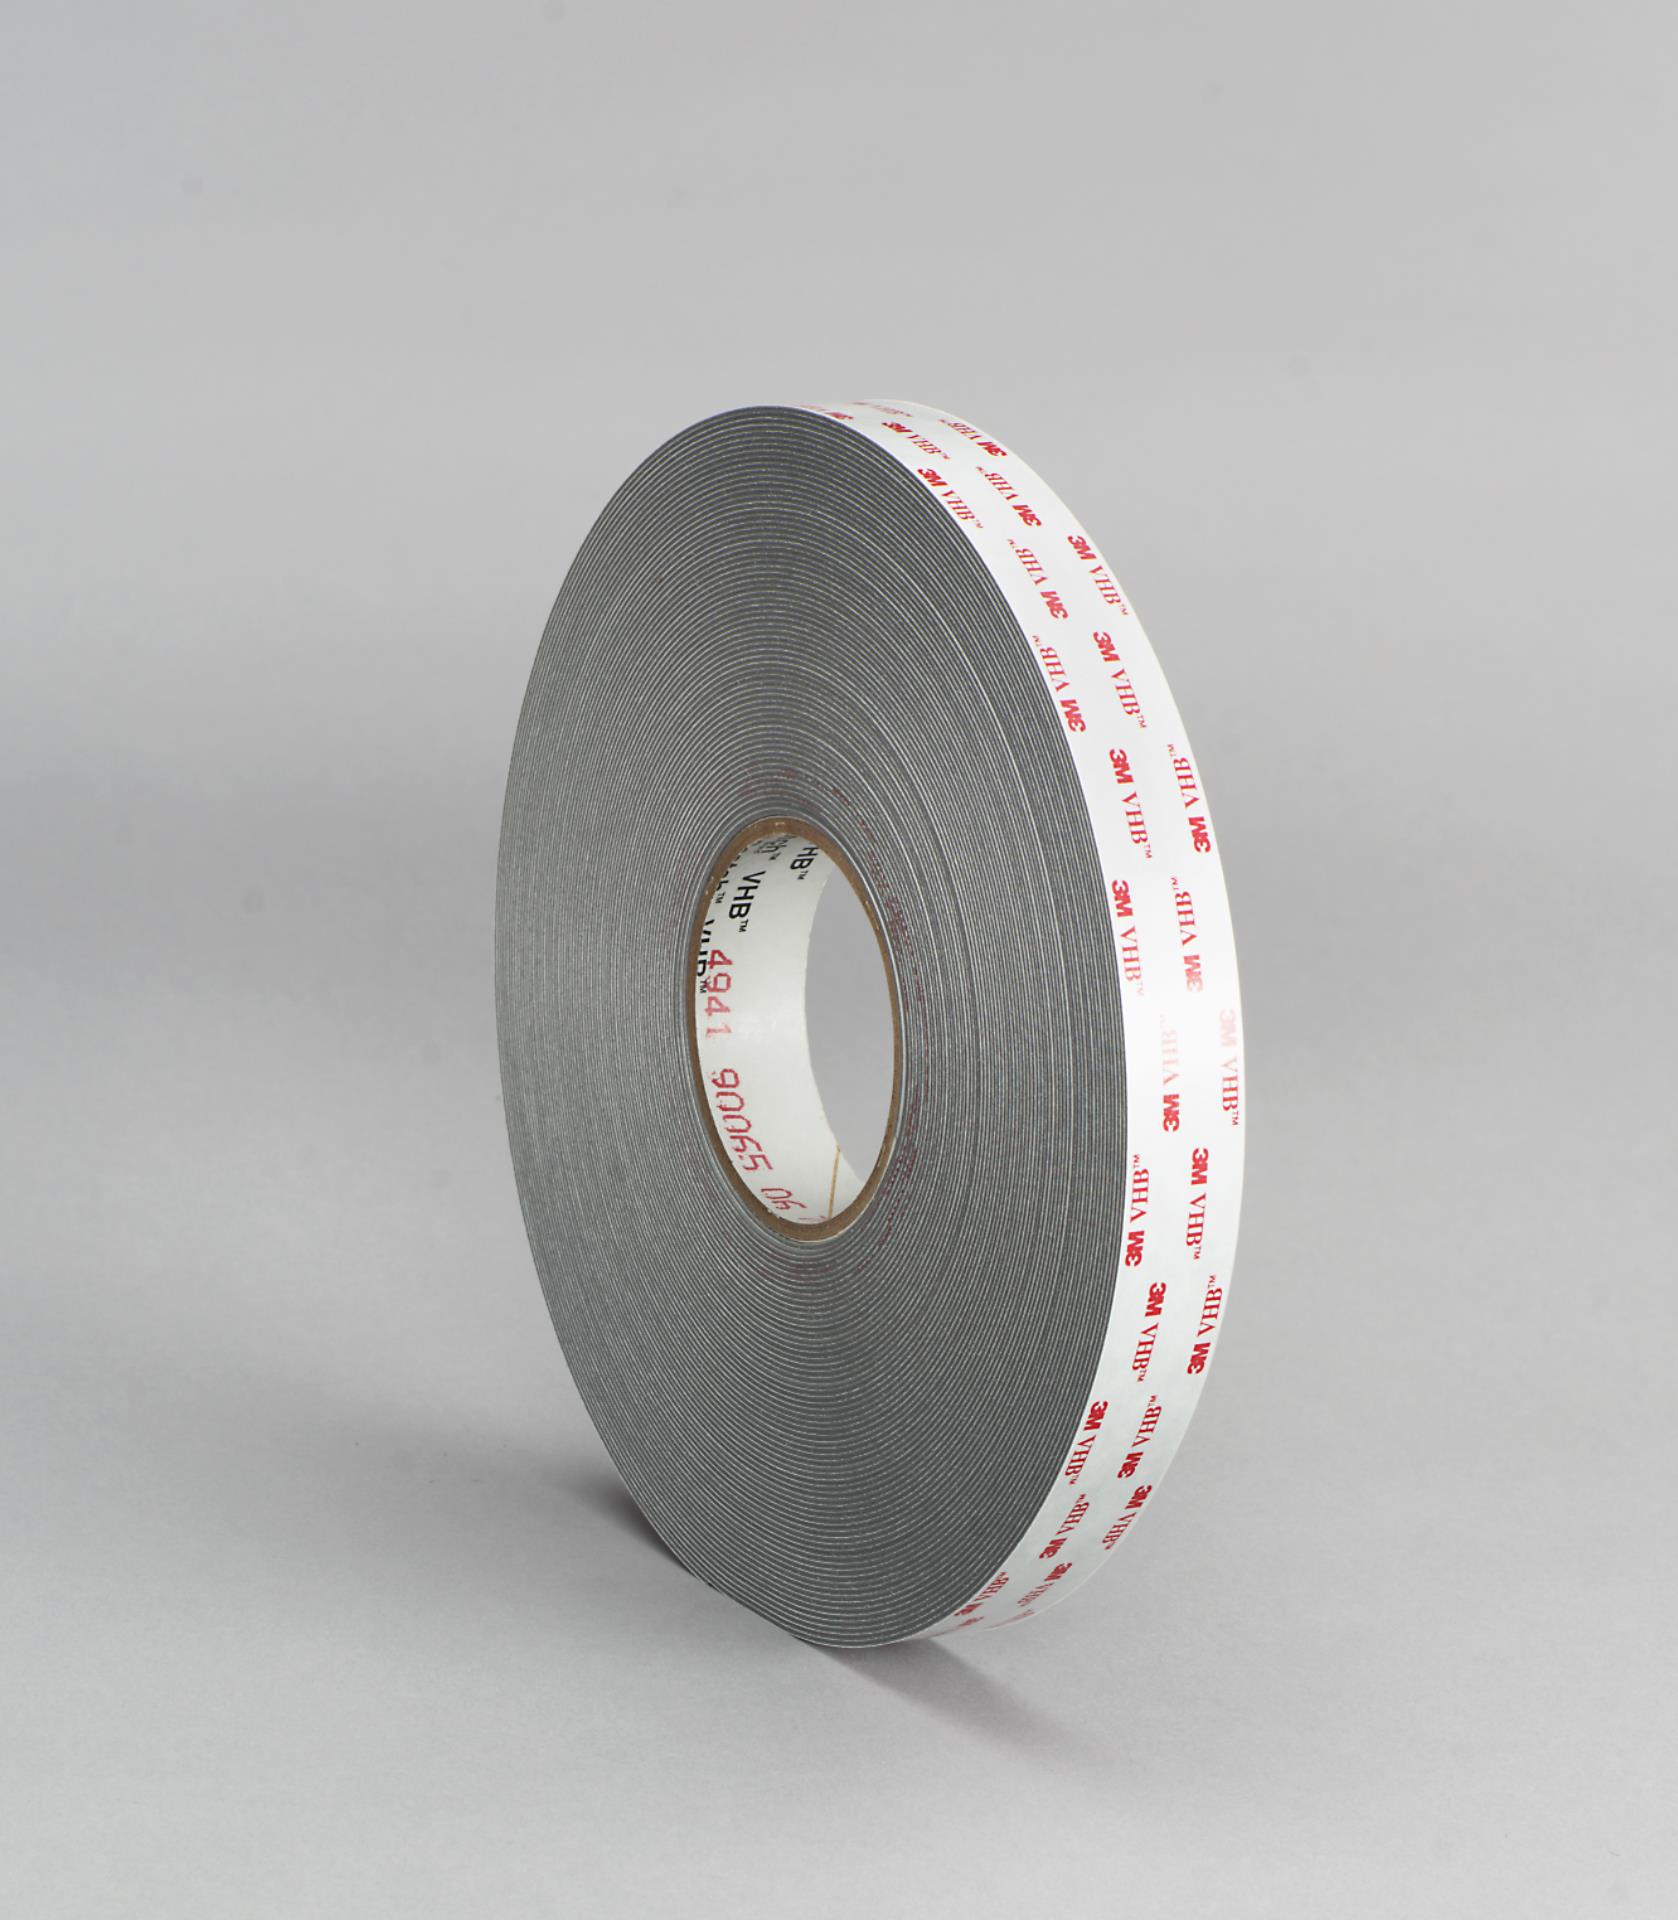 3M Double Sided Tape Super Strong Foam Tape for Outdoor and Indoor 0.25in x 15ft HPP Heavy Duty Mounting Tape Converted from 3M VHB 5952,